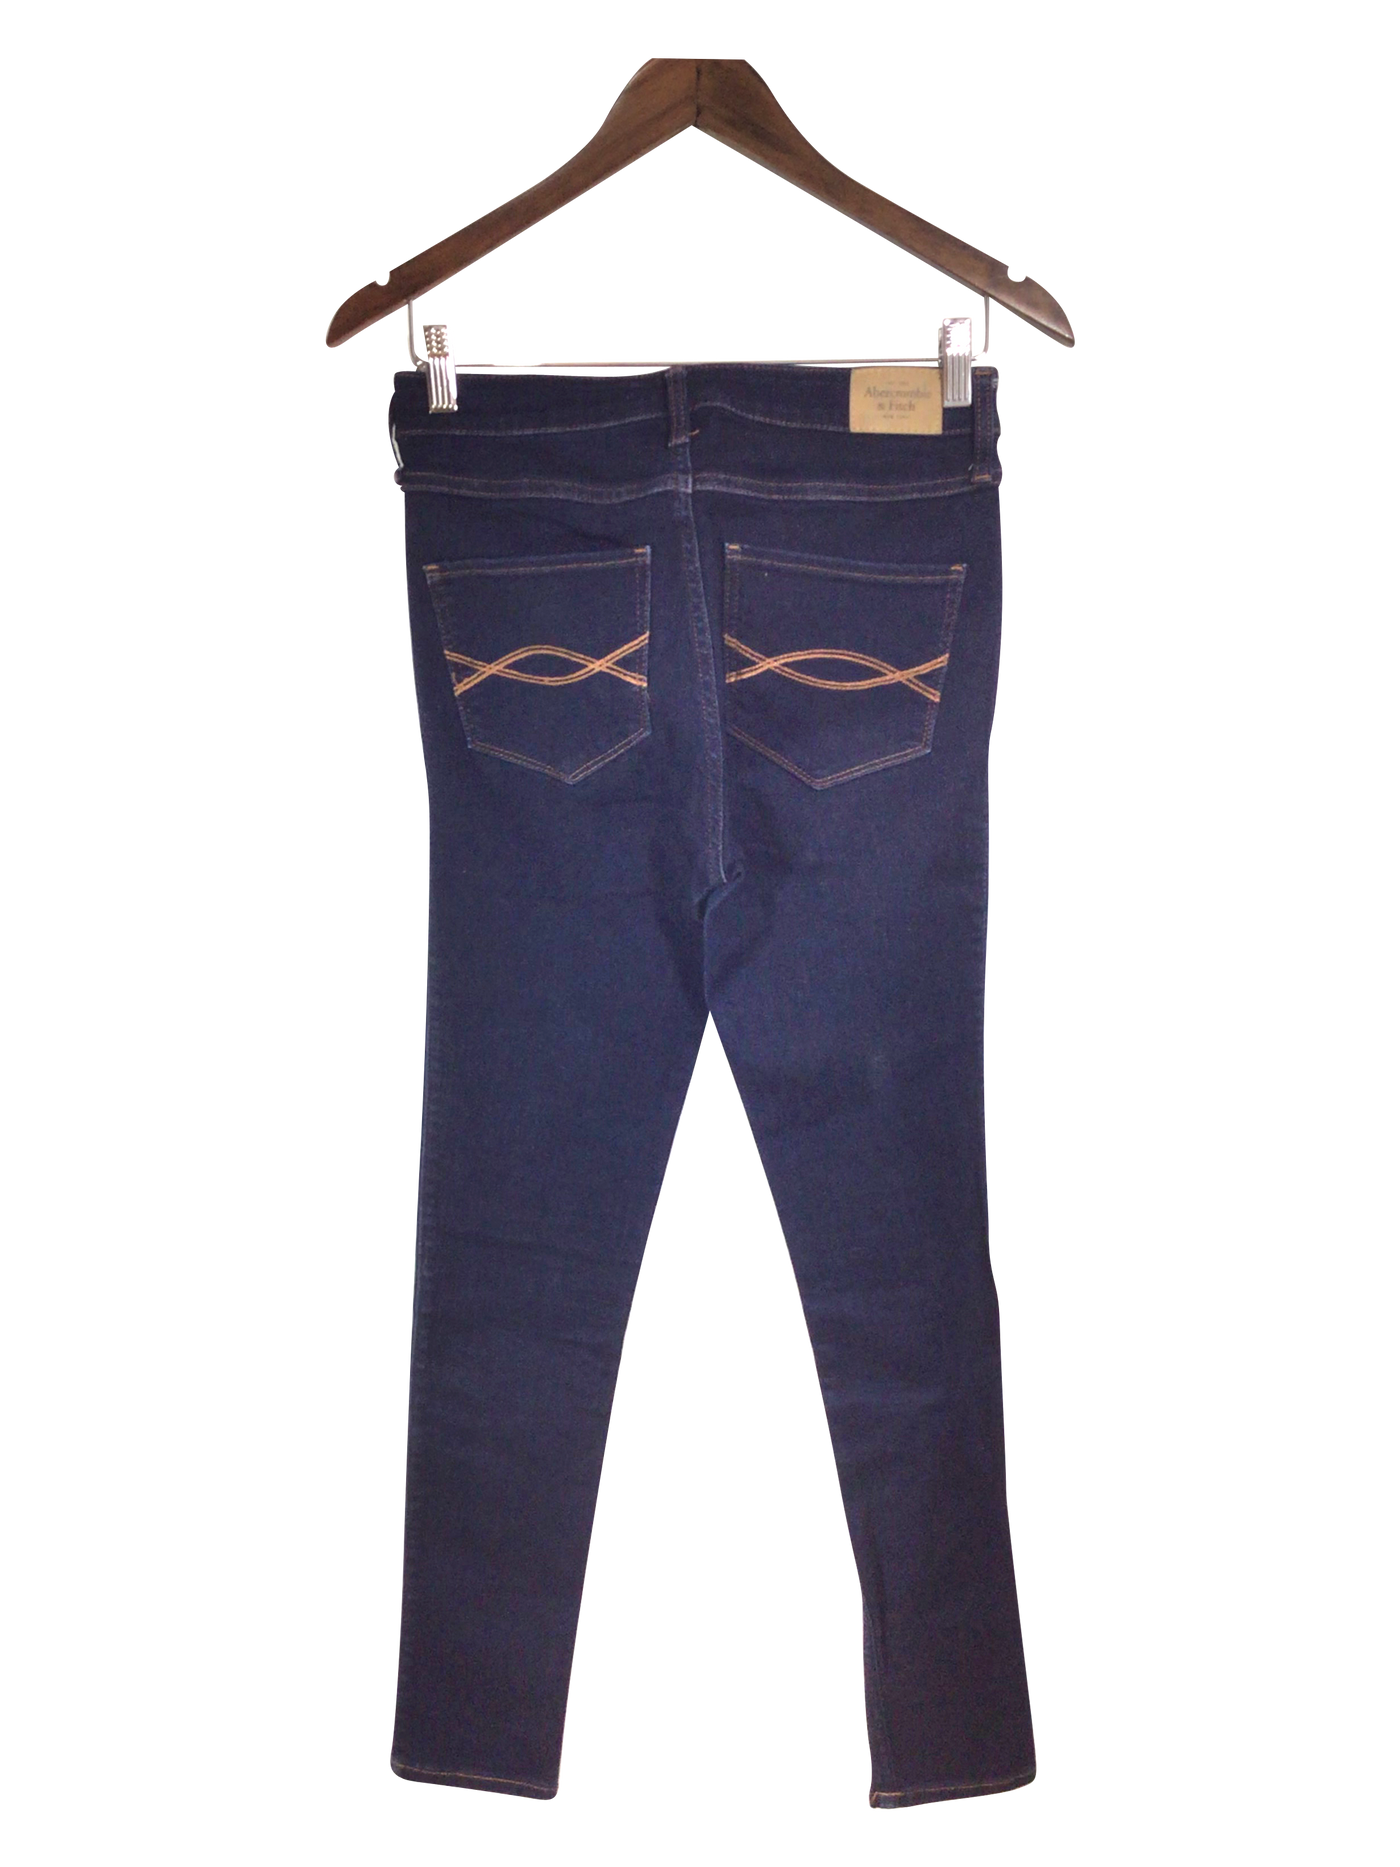 ABERCROMBIE & FITCH Straight-legged Jeans Regular fit in Blue - Size 28x29 | 34 $ KOOP